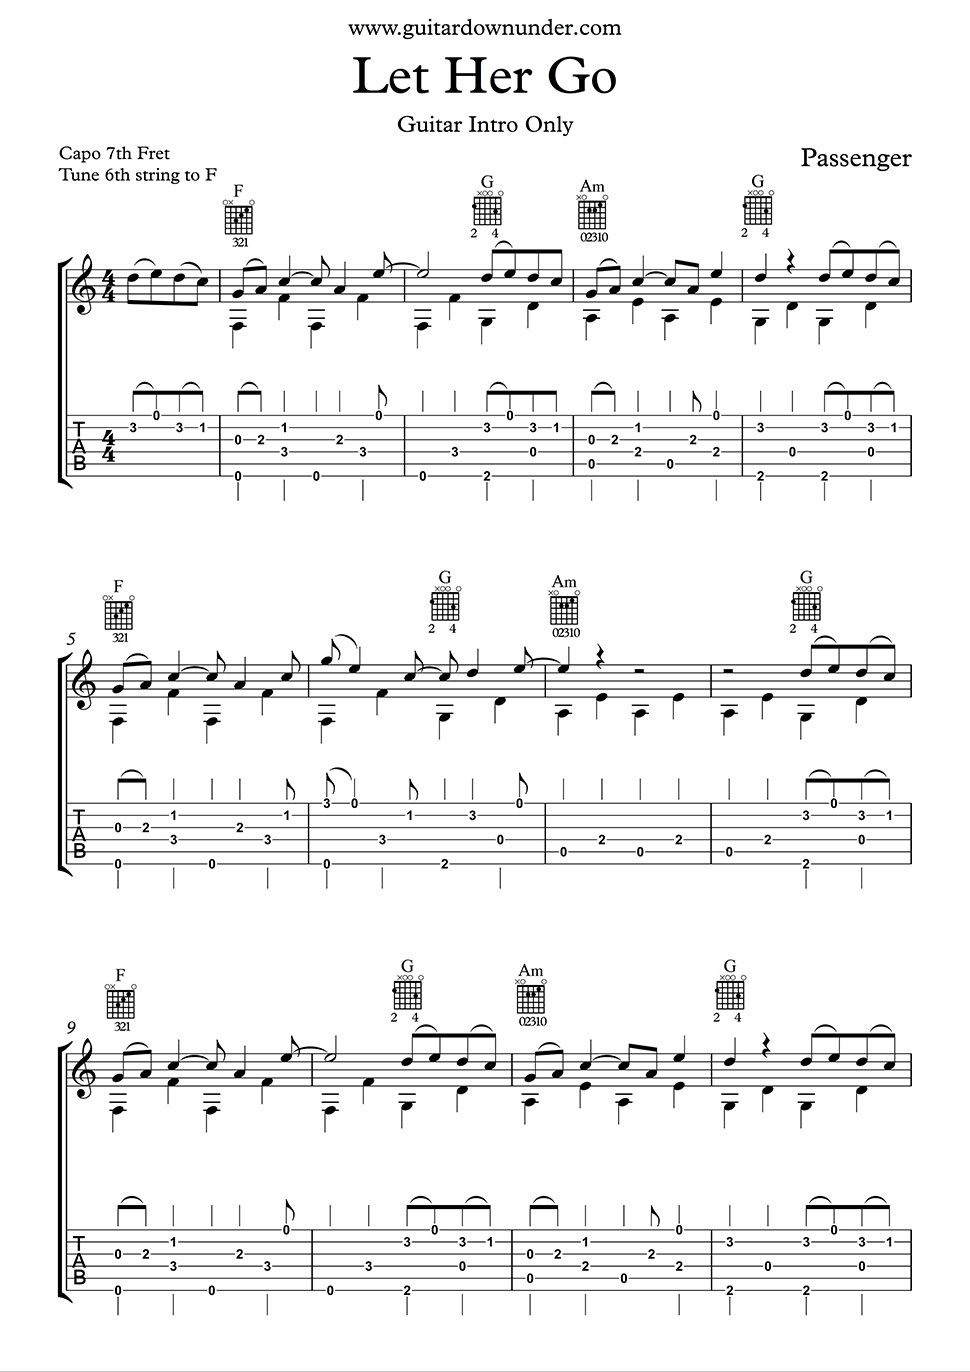 Guitar Chords Songs Let Her Go Chords And Lyrics Passenger Includes Correct Guitar Tab